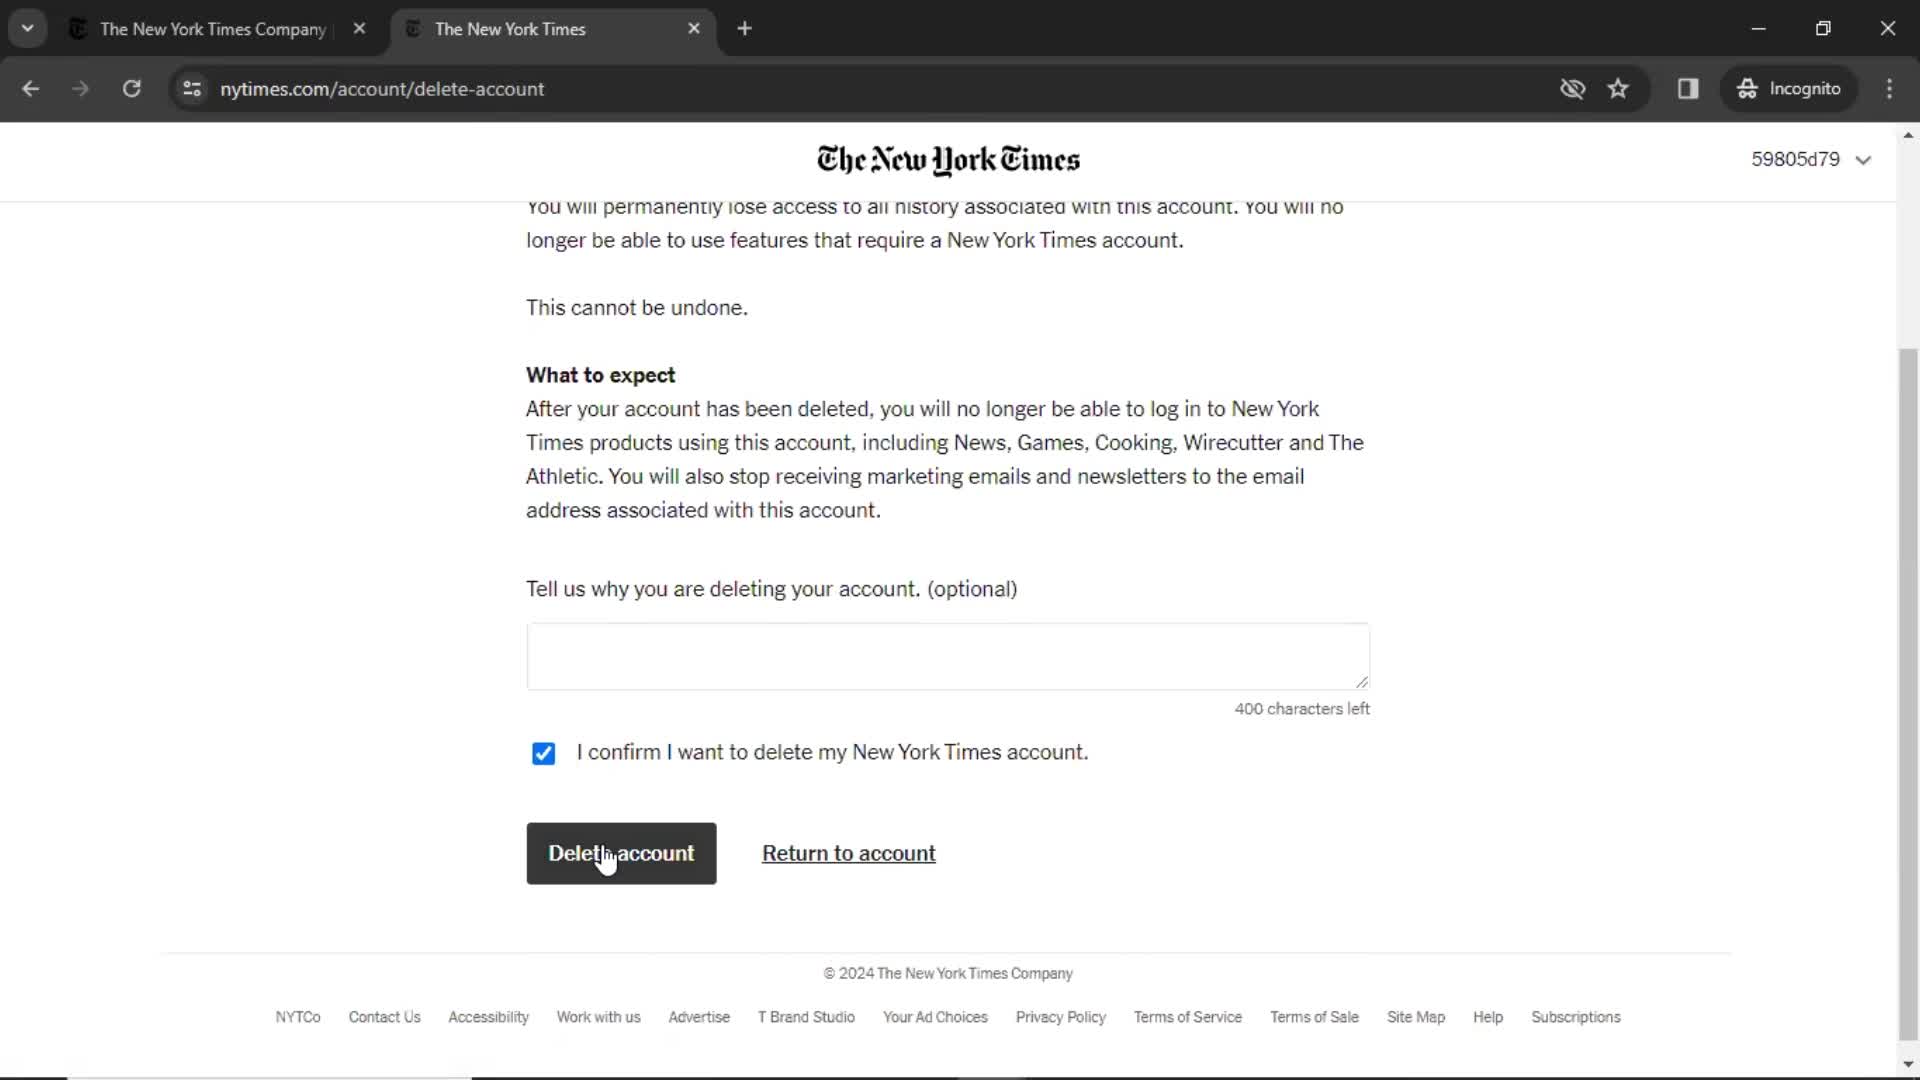 The New York Times confirm delete screenshot